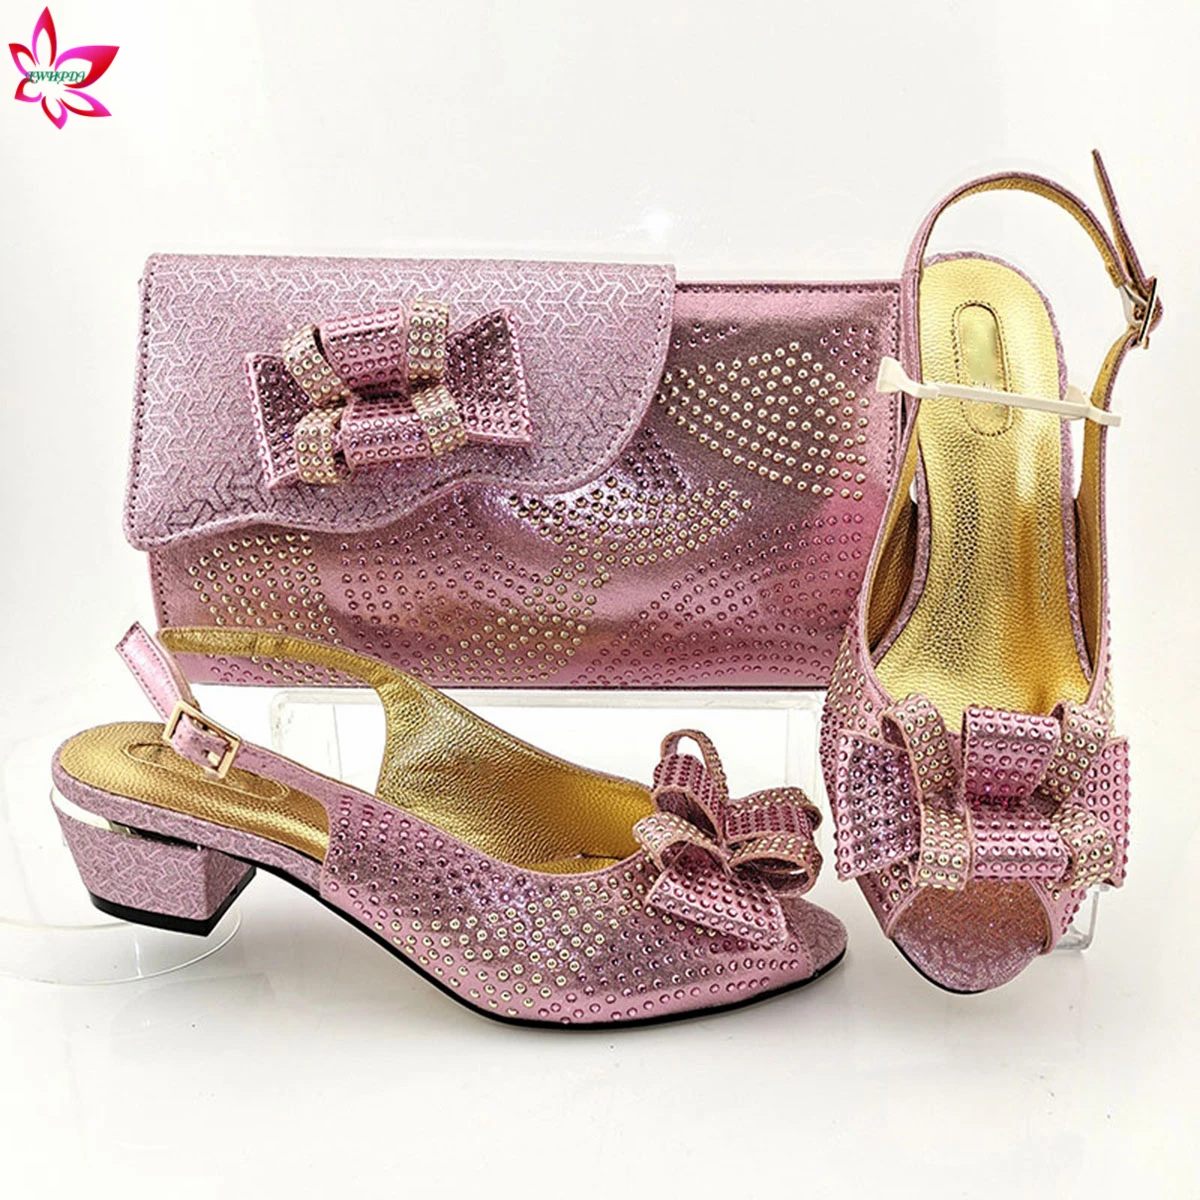 2021 Low Heels Mature Style Italian Women Shoes and Bag Set in Magenta Color Comfortable Heels Italian Lady Shoes images - 6